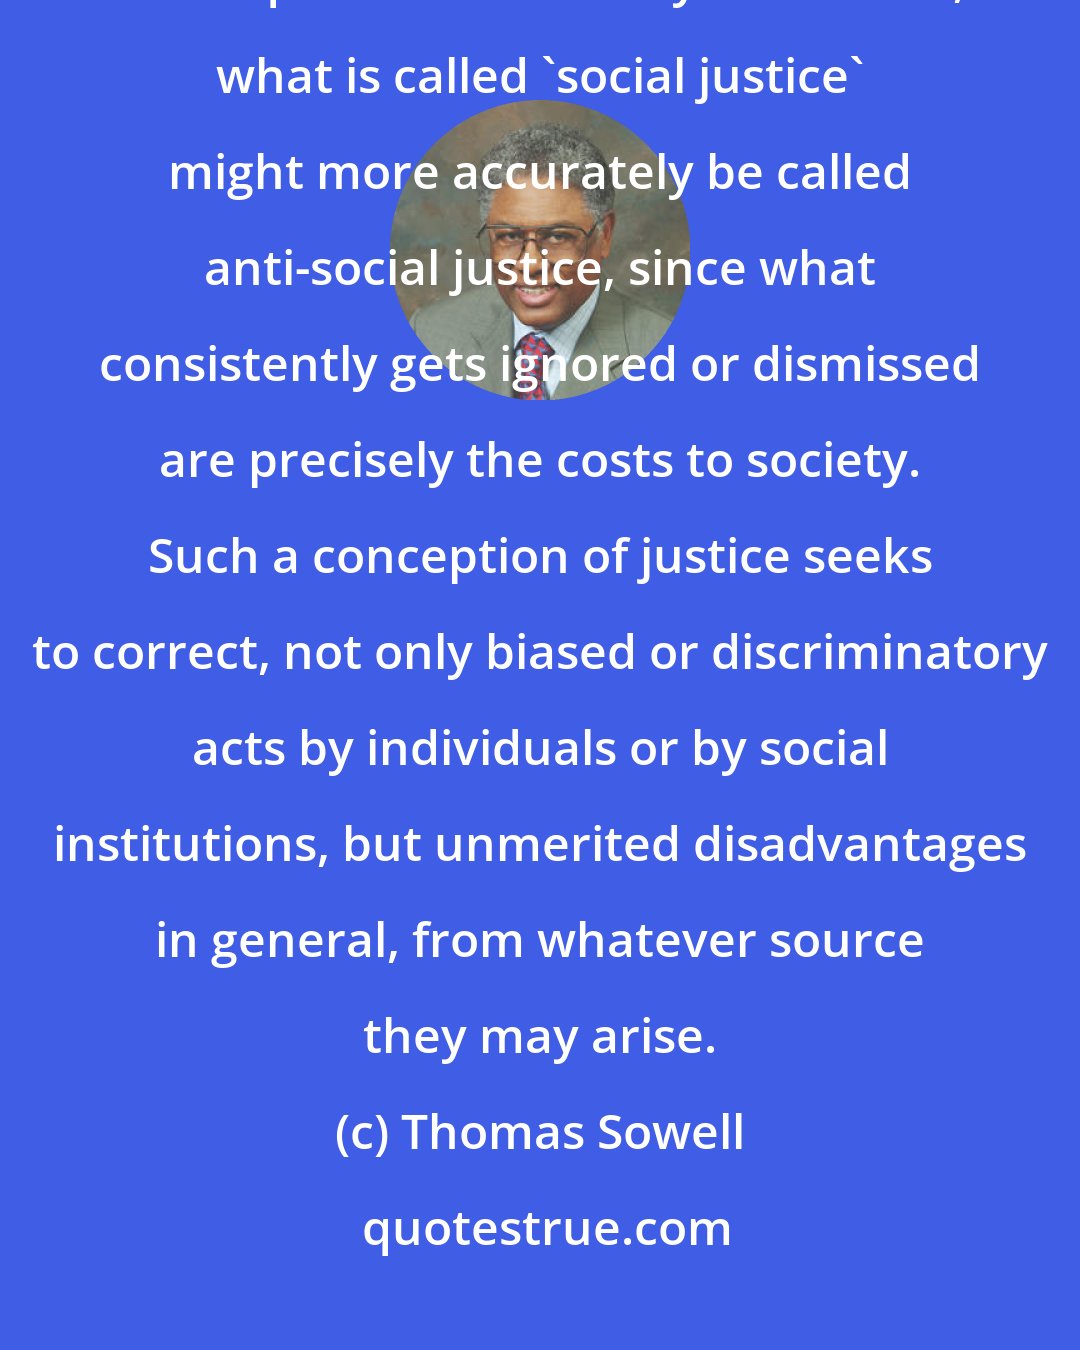 Thomas Sowell: In its pursuit of justice for a segment of society, in disregard of the consequences for society as a whole, what is called 'social justice' might more accurately be called anti-social justice, since what consistently gets ignored or dismissed are precisely the costs to society. Such a conception of justice seeks to correct, not only biased or discriminatory acts by individuals or by social institutions, but unmerited disadvantages in general, from whatever source they may arise.